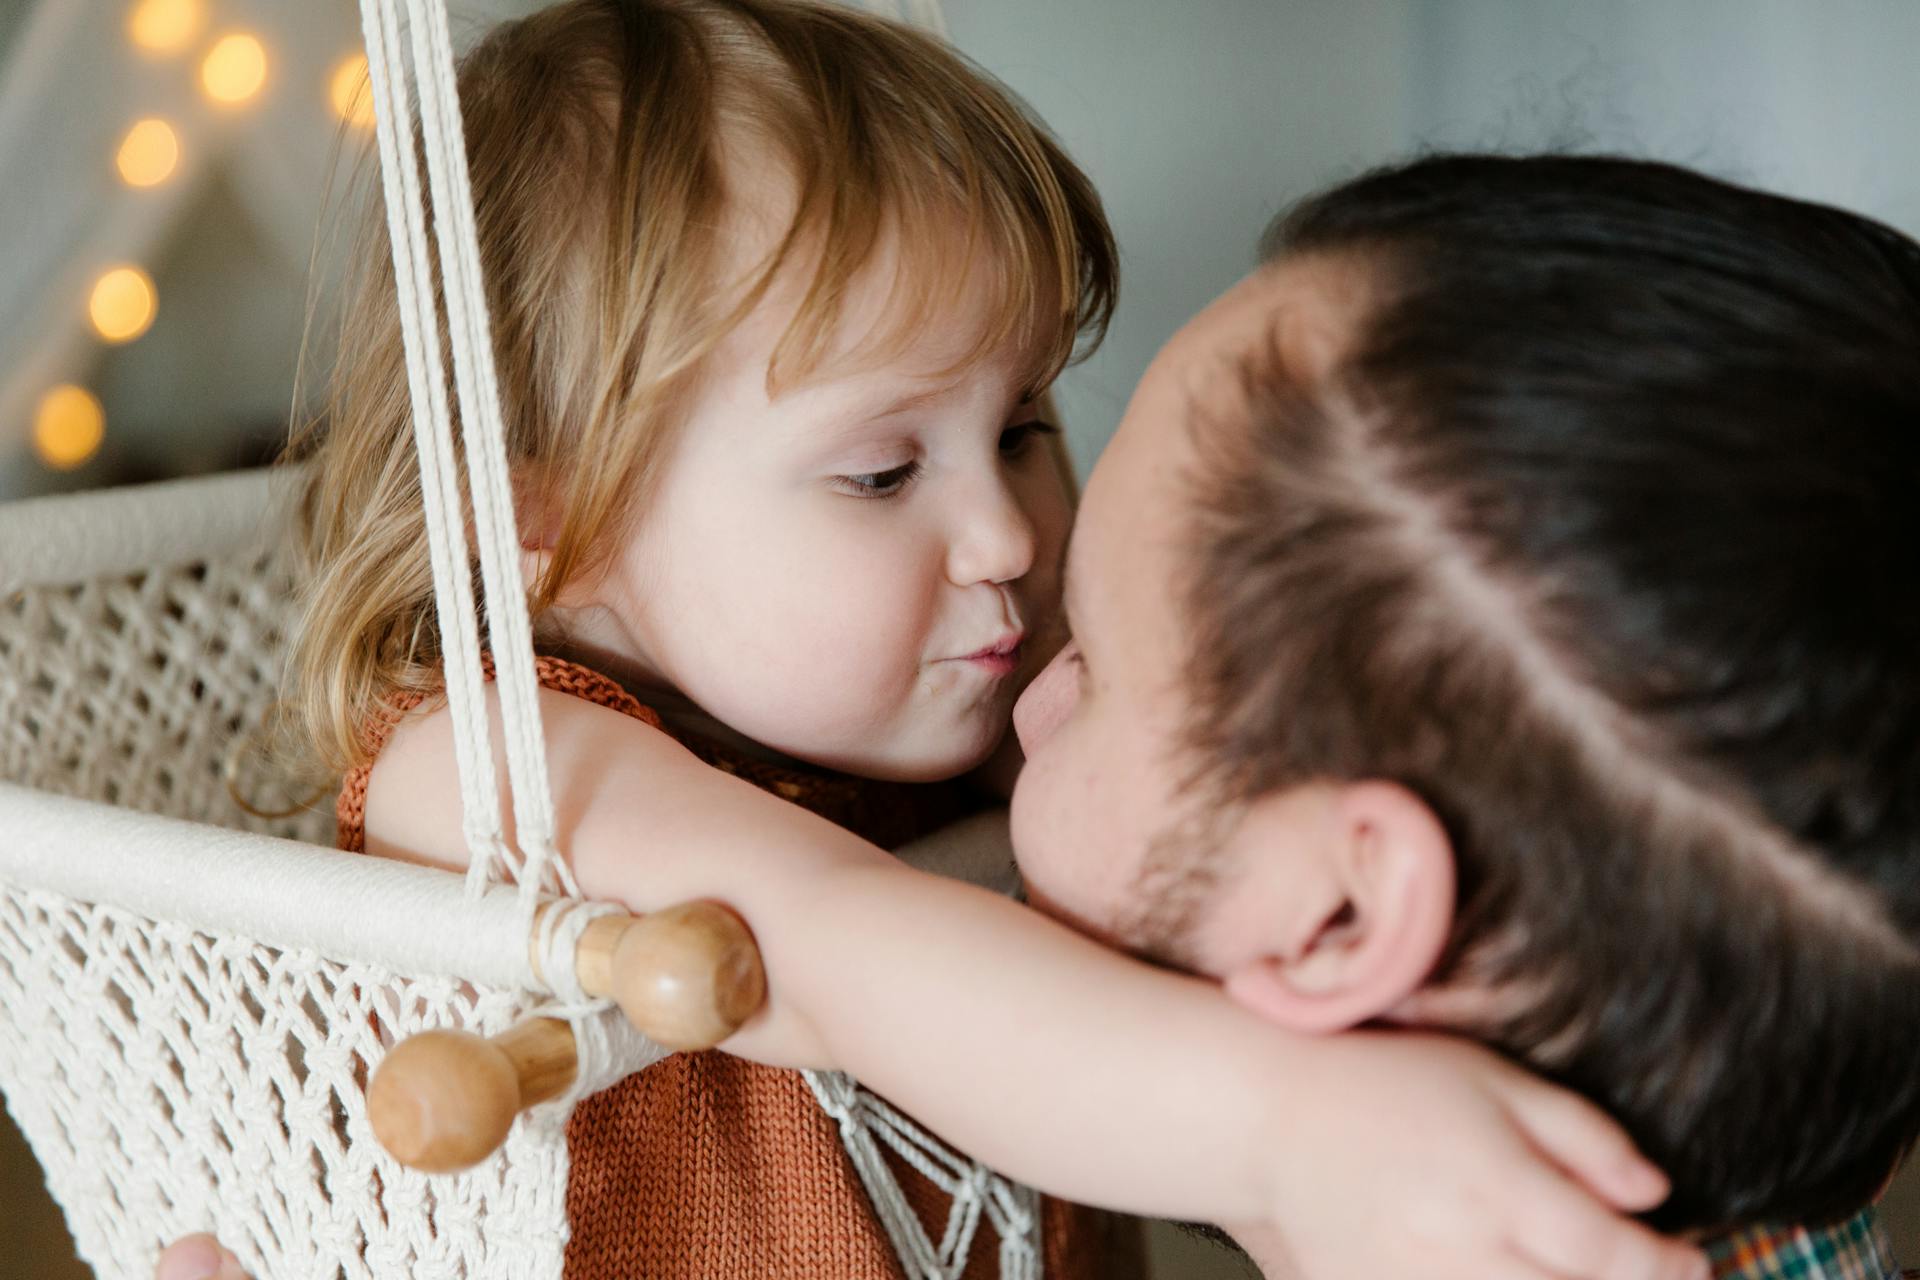 A little girl hugging her father while resting in a hanging swing | Source: Pexels